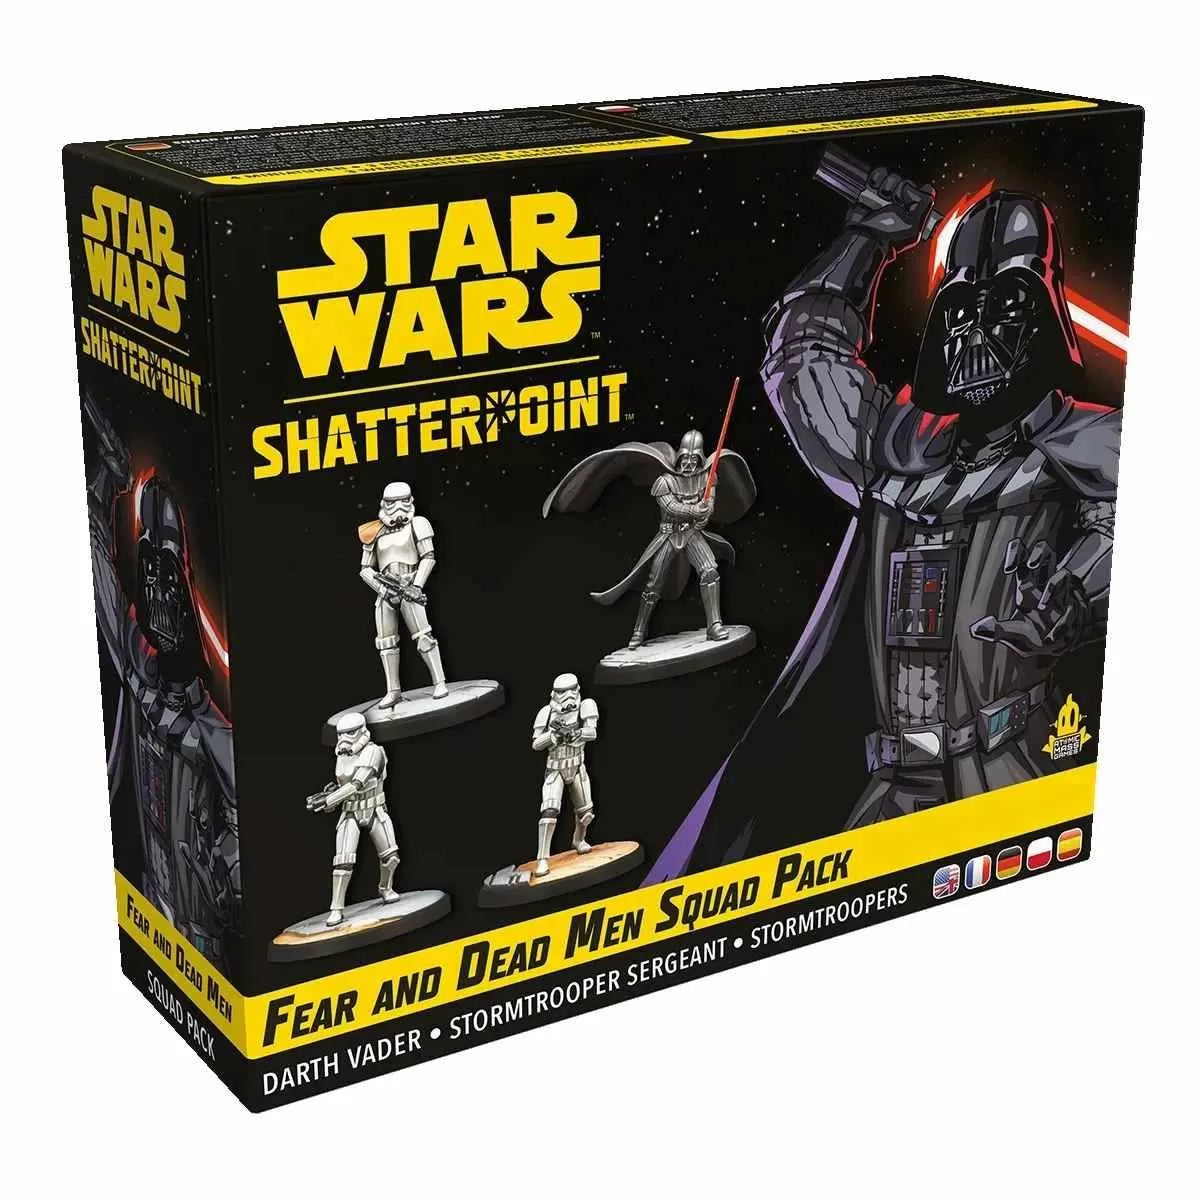 Star Wars Shatterpoint: Fear and Dead Men Darth Vader Squad Pack